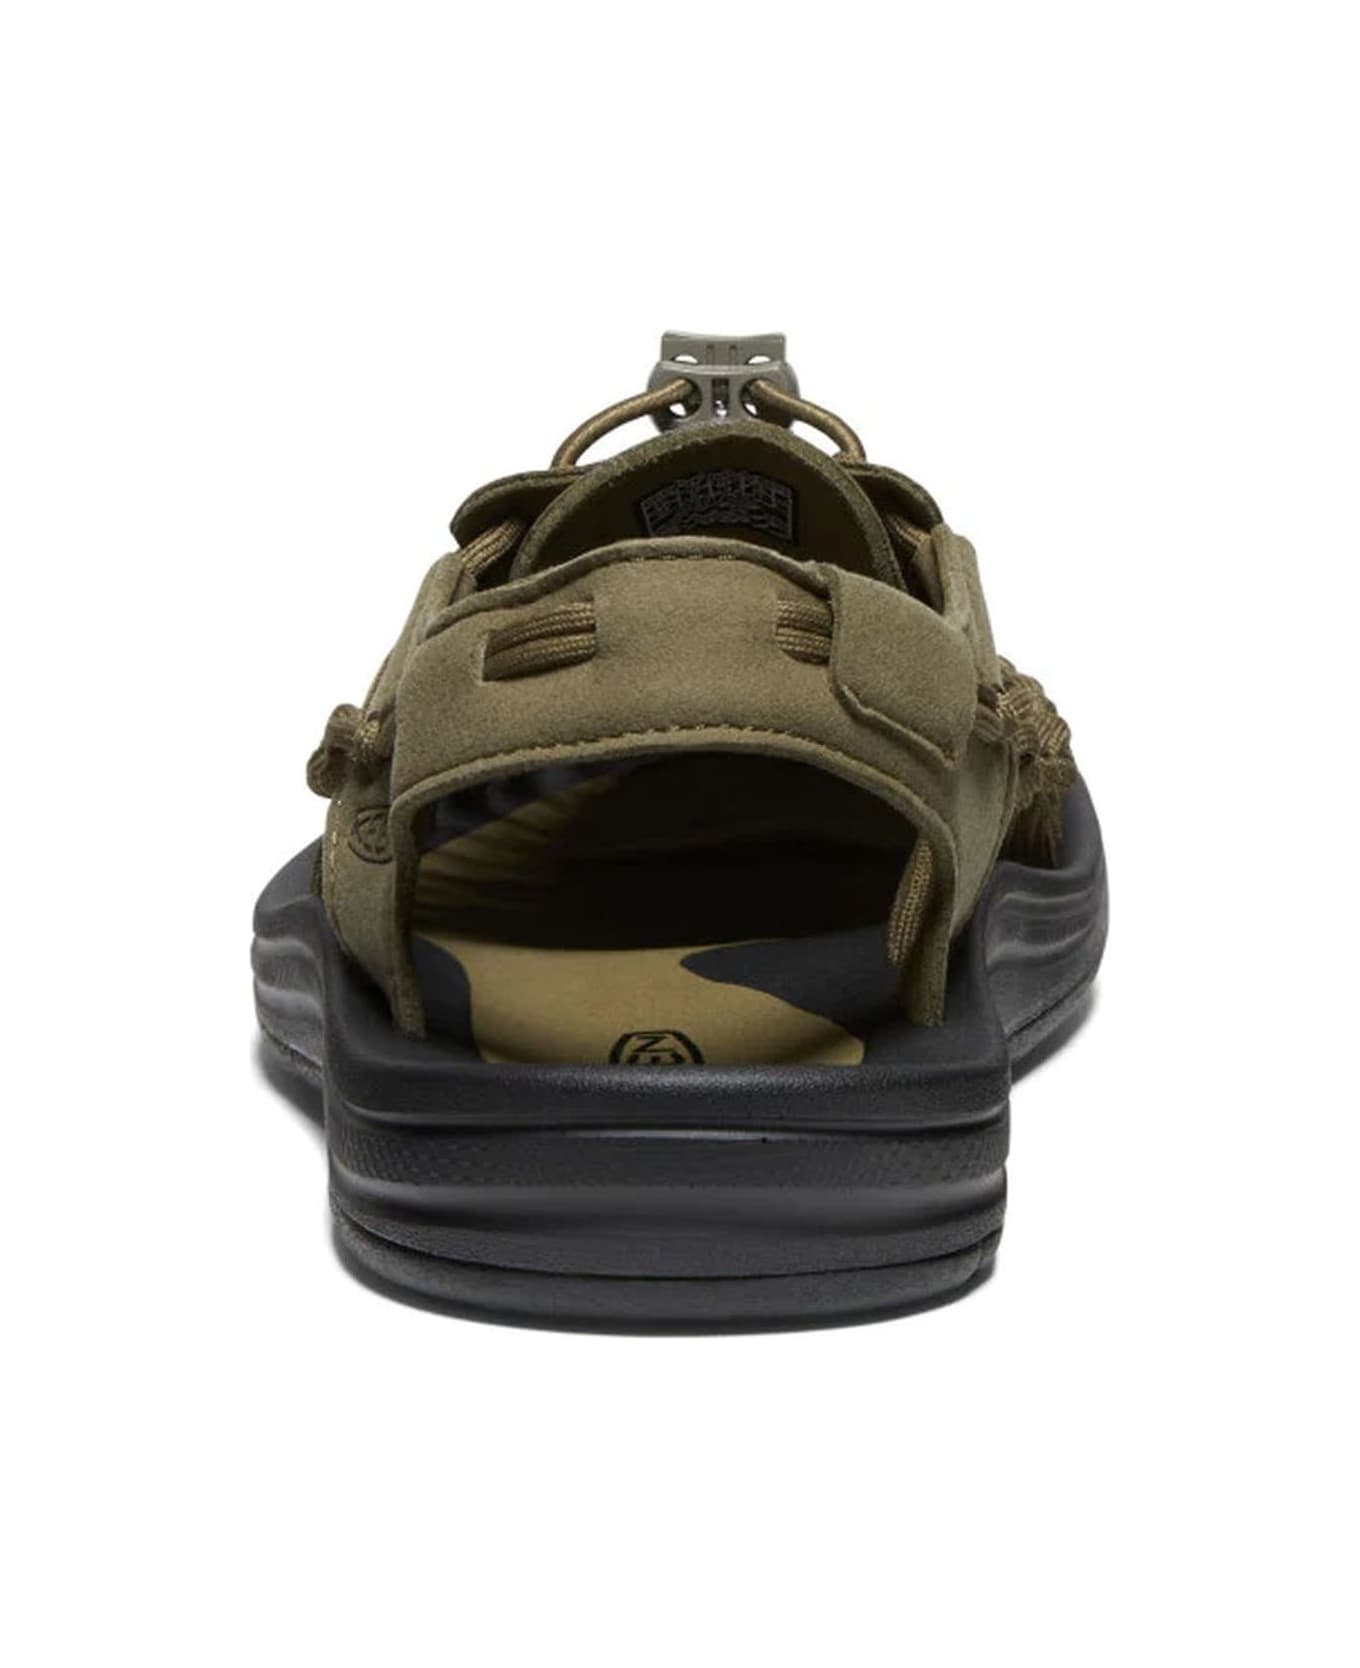 Keen Green Two-cord Construction Sandals - Olive